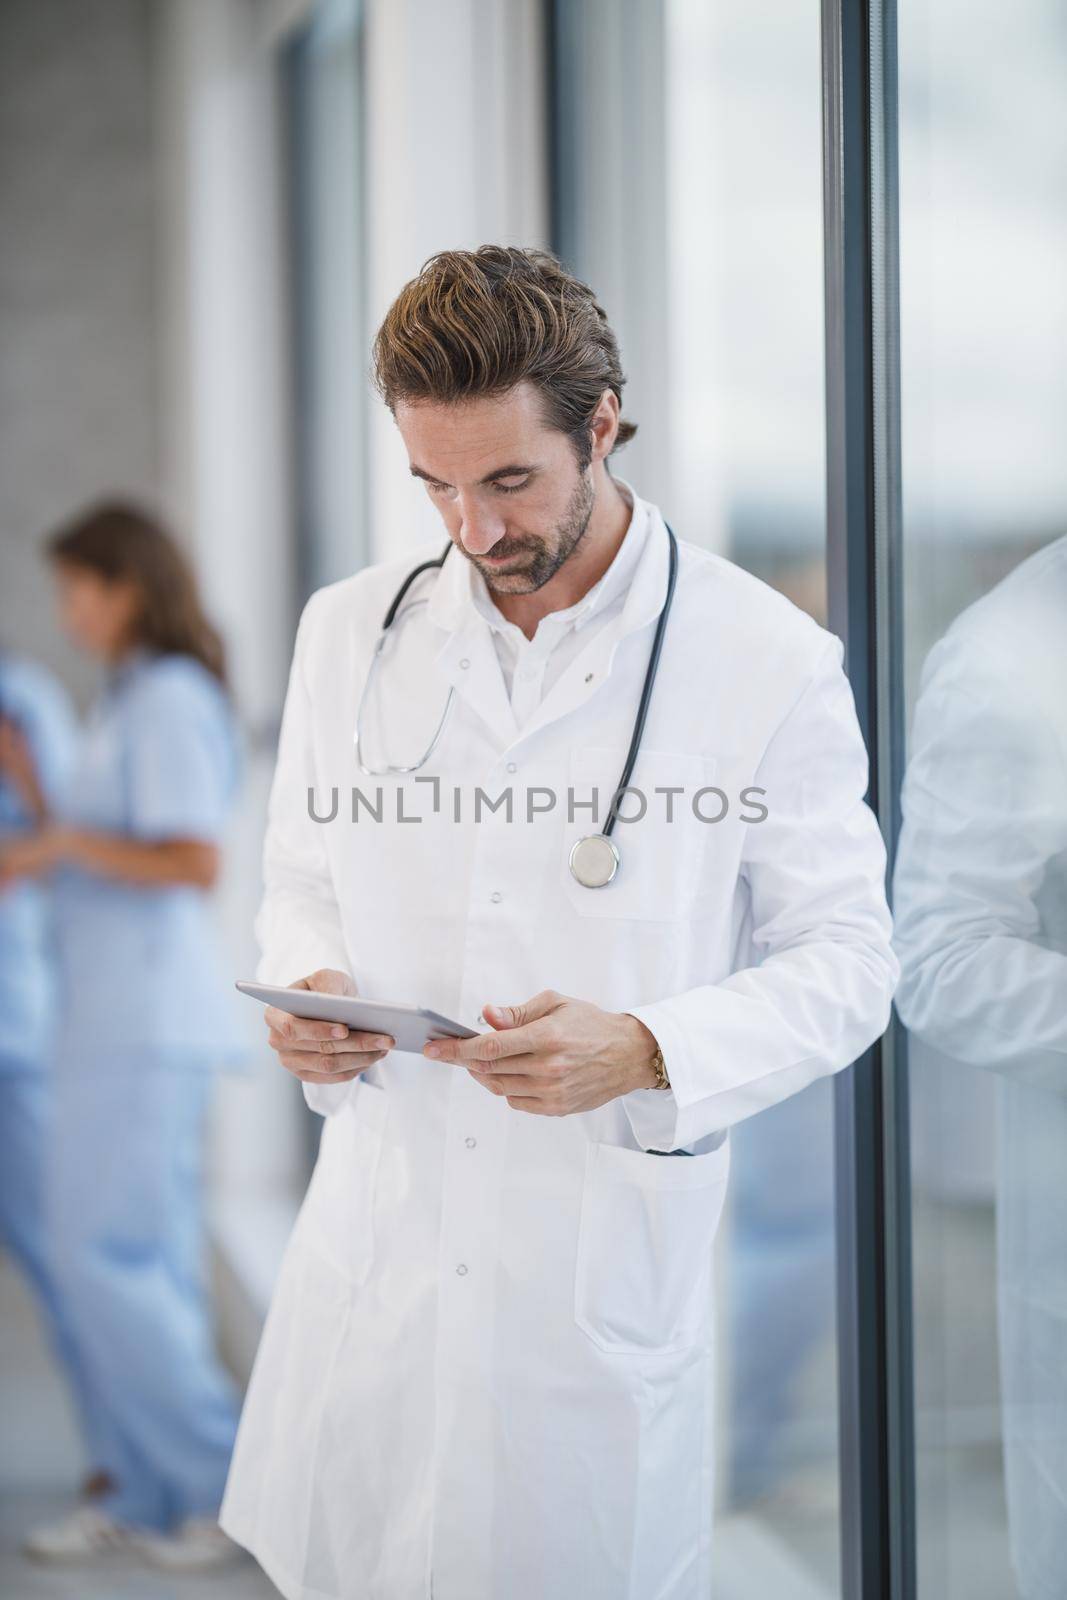 Shot of a mature doctor using digital tablet while standing near a window in a hospital hallway during the Covid-19 pandemic.